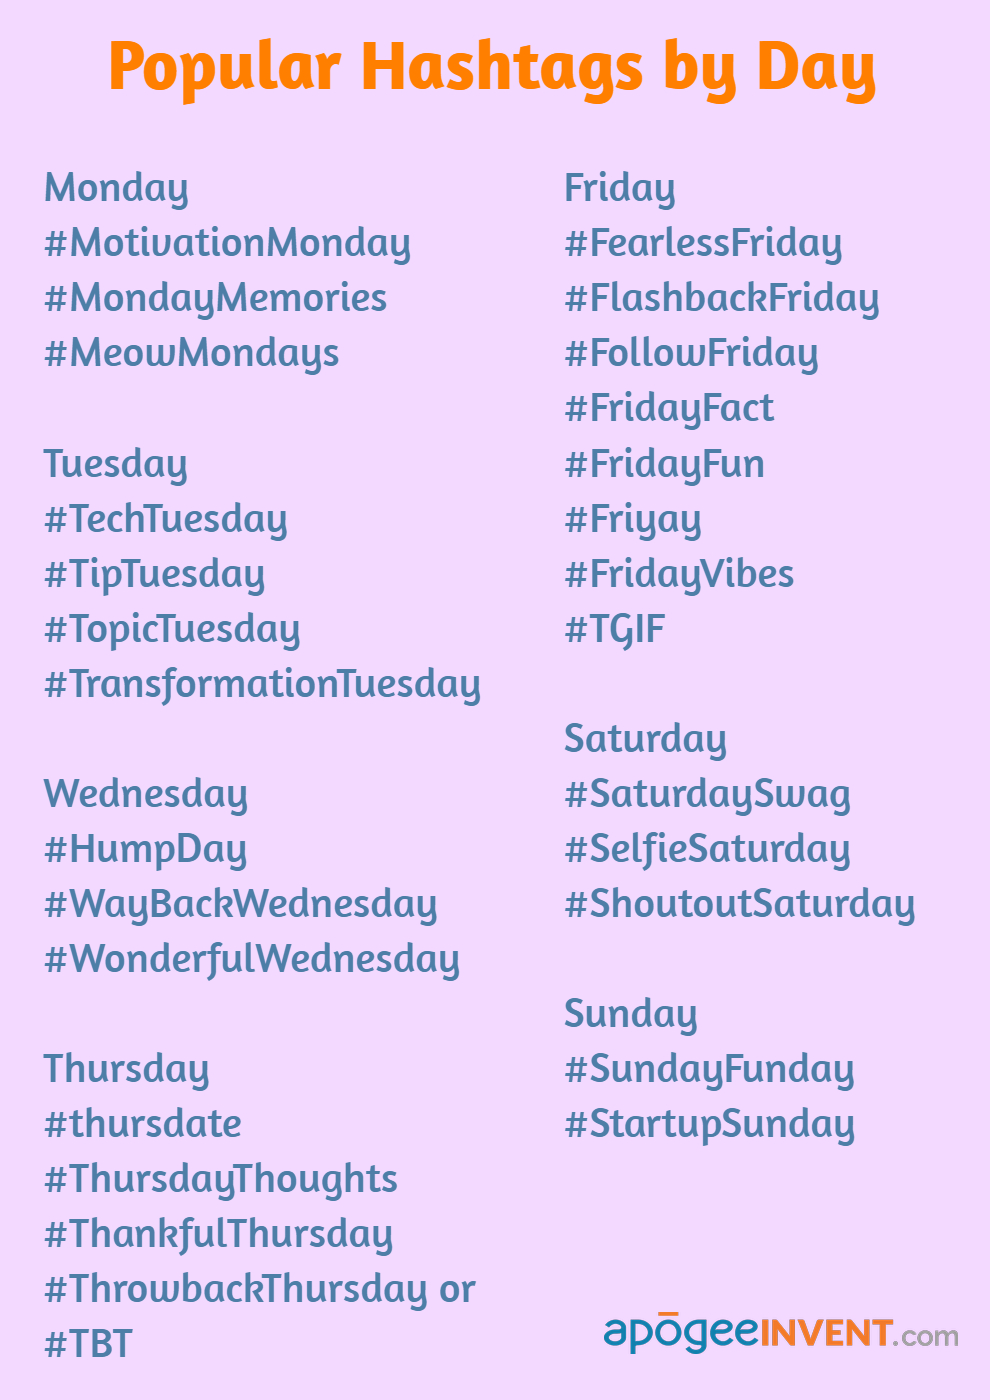 Popular Hashtags for each day of the Week